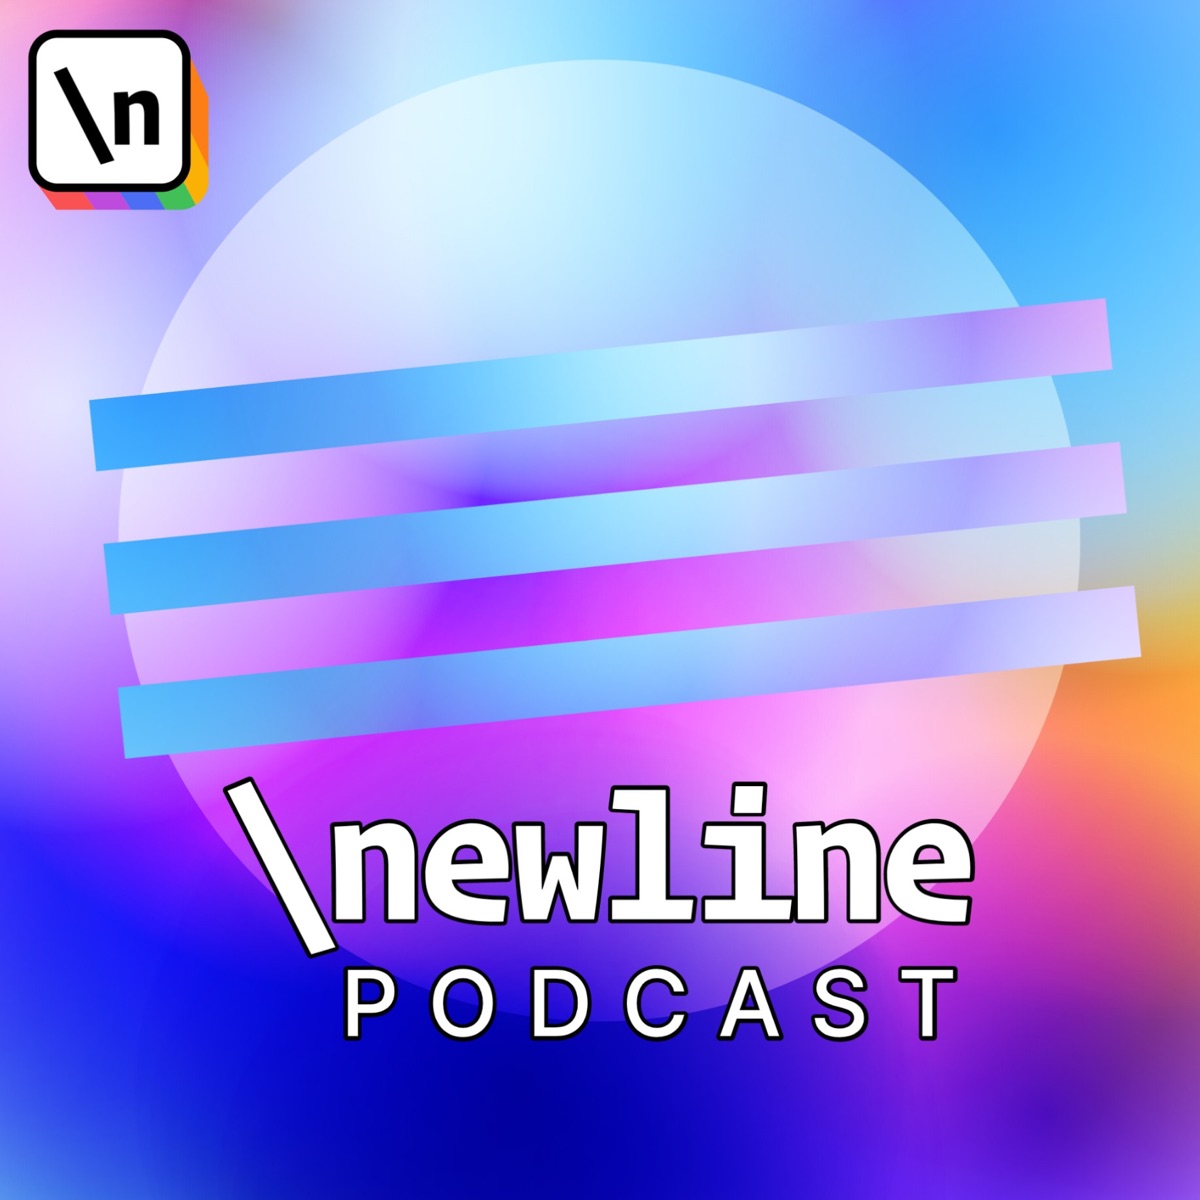 Newline Podcast Podtail - 20 roblox evil skeptic face code pictures and ideas on weric